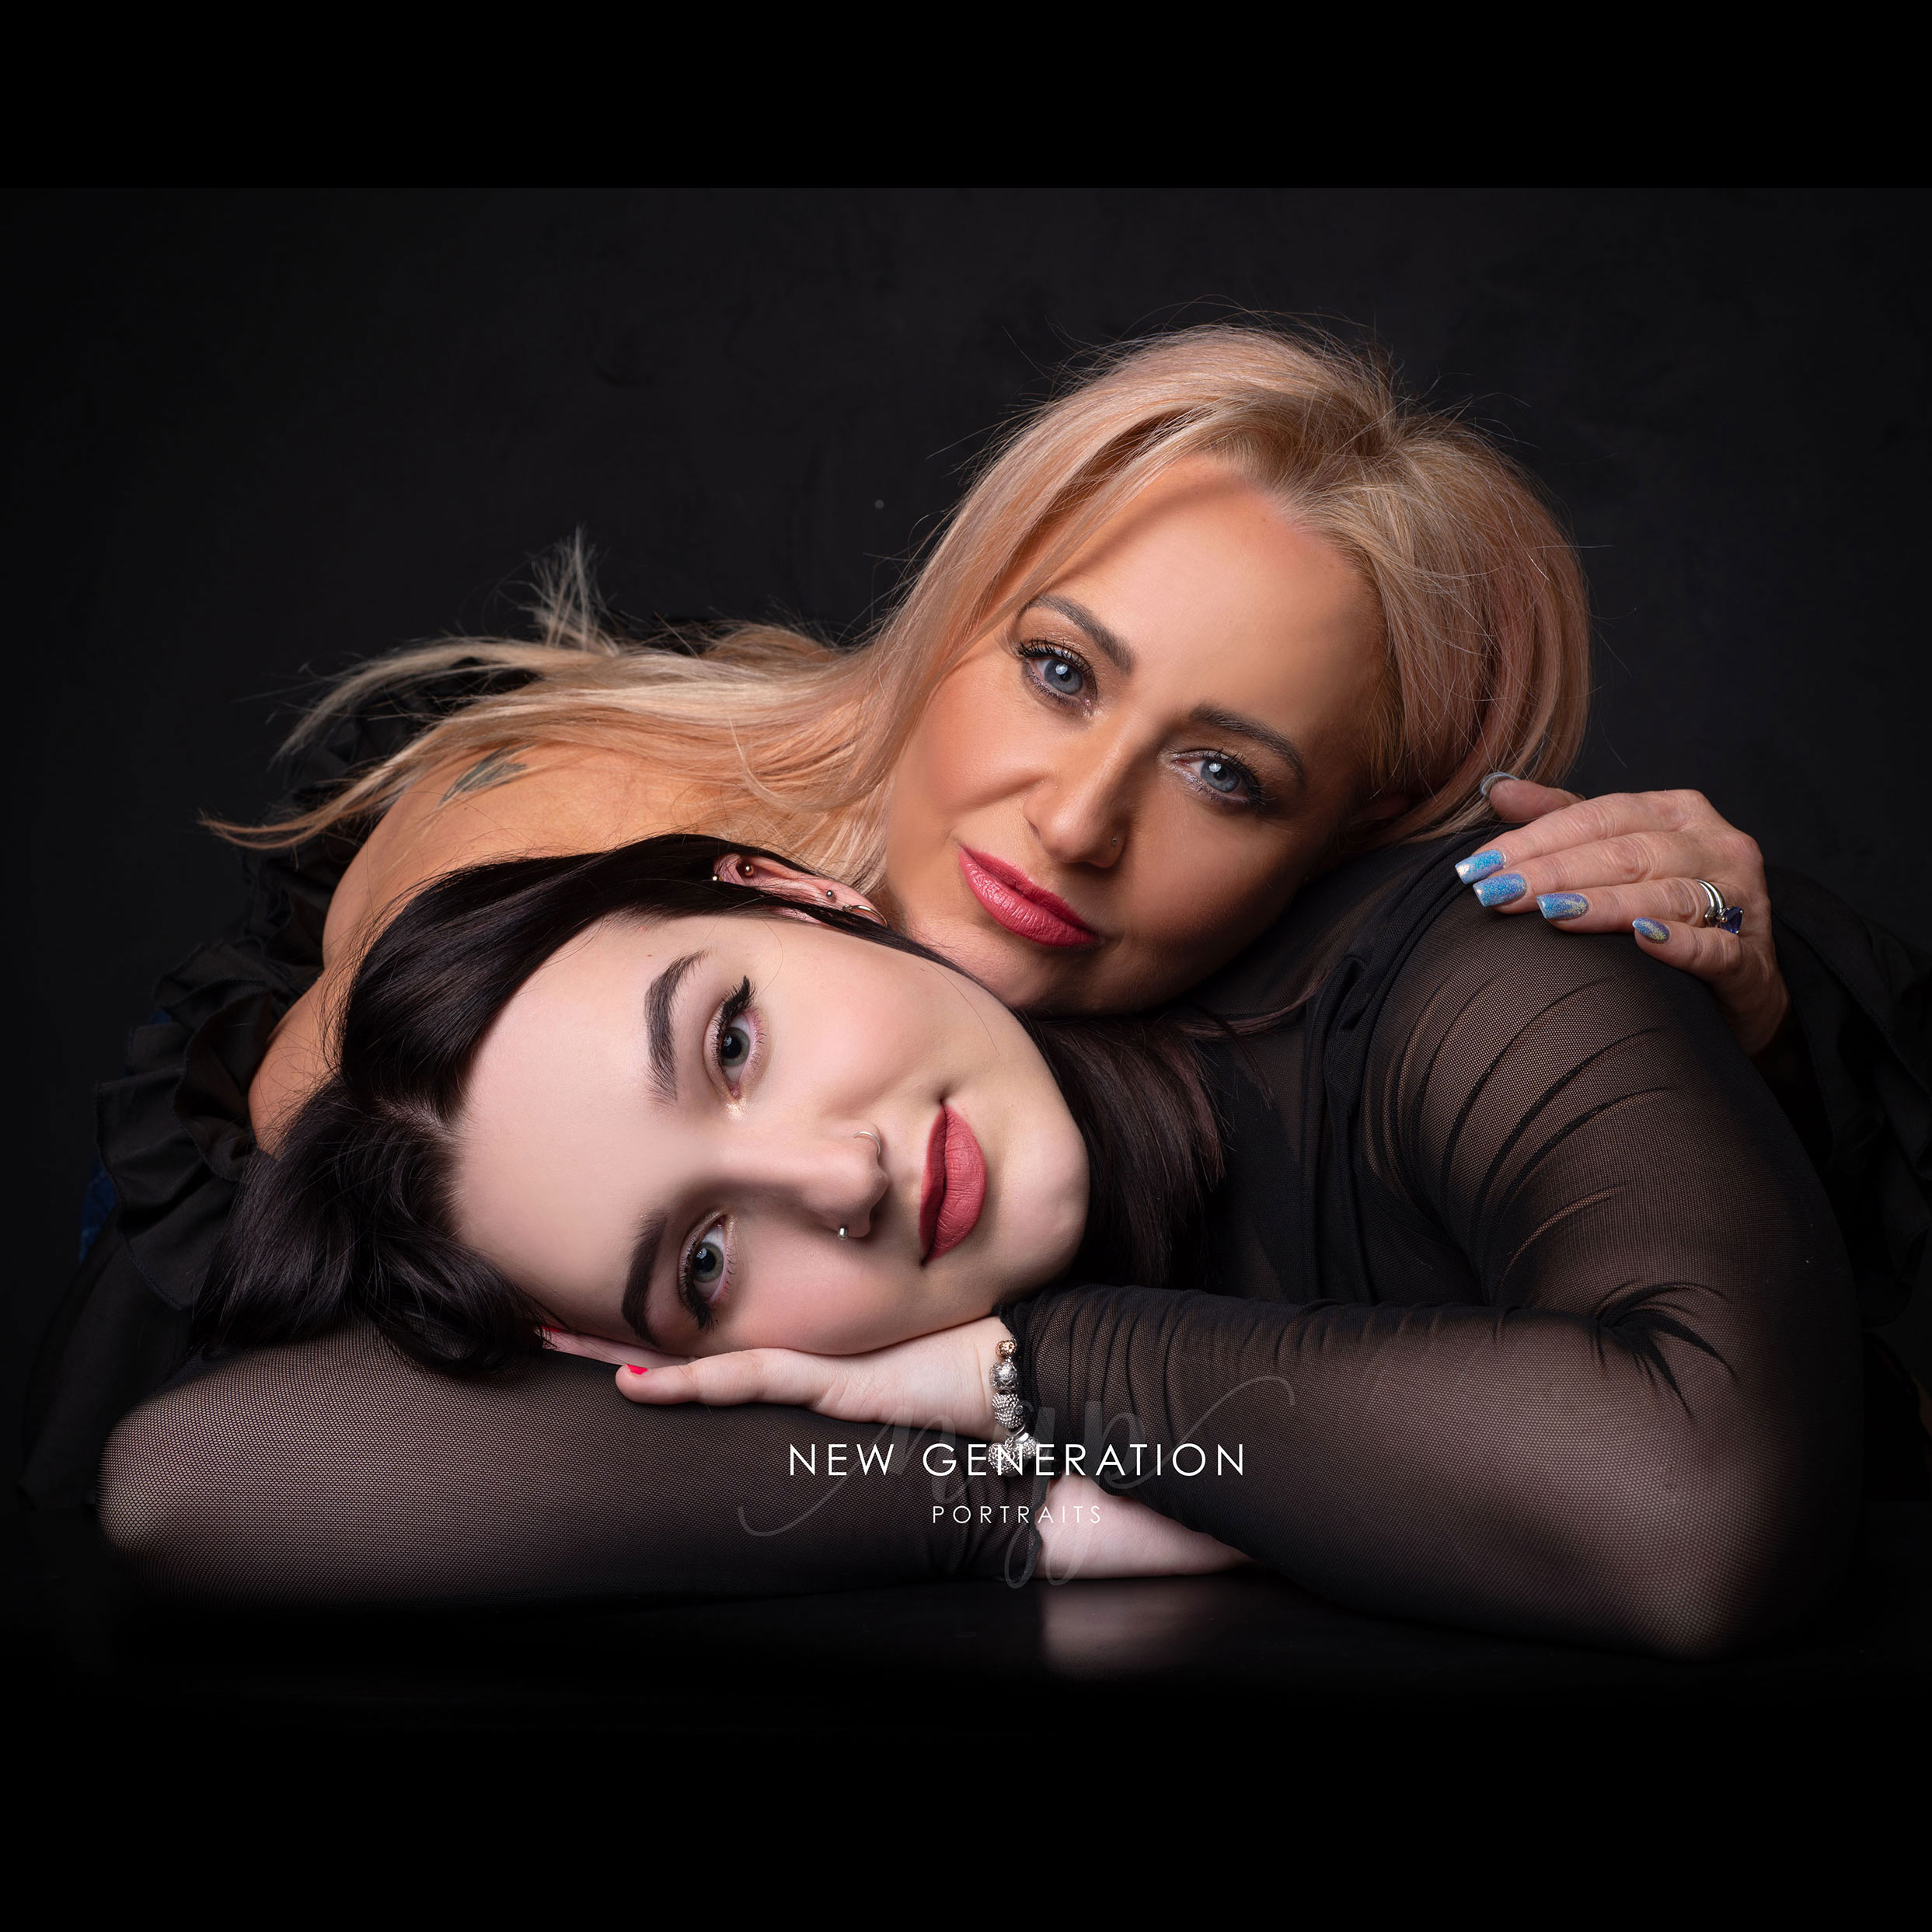 Mum and me teenager portrait dressed in black captured in our Spital studio New Generation Portraits Ltd.